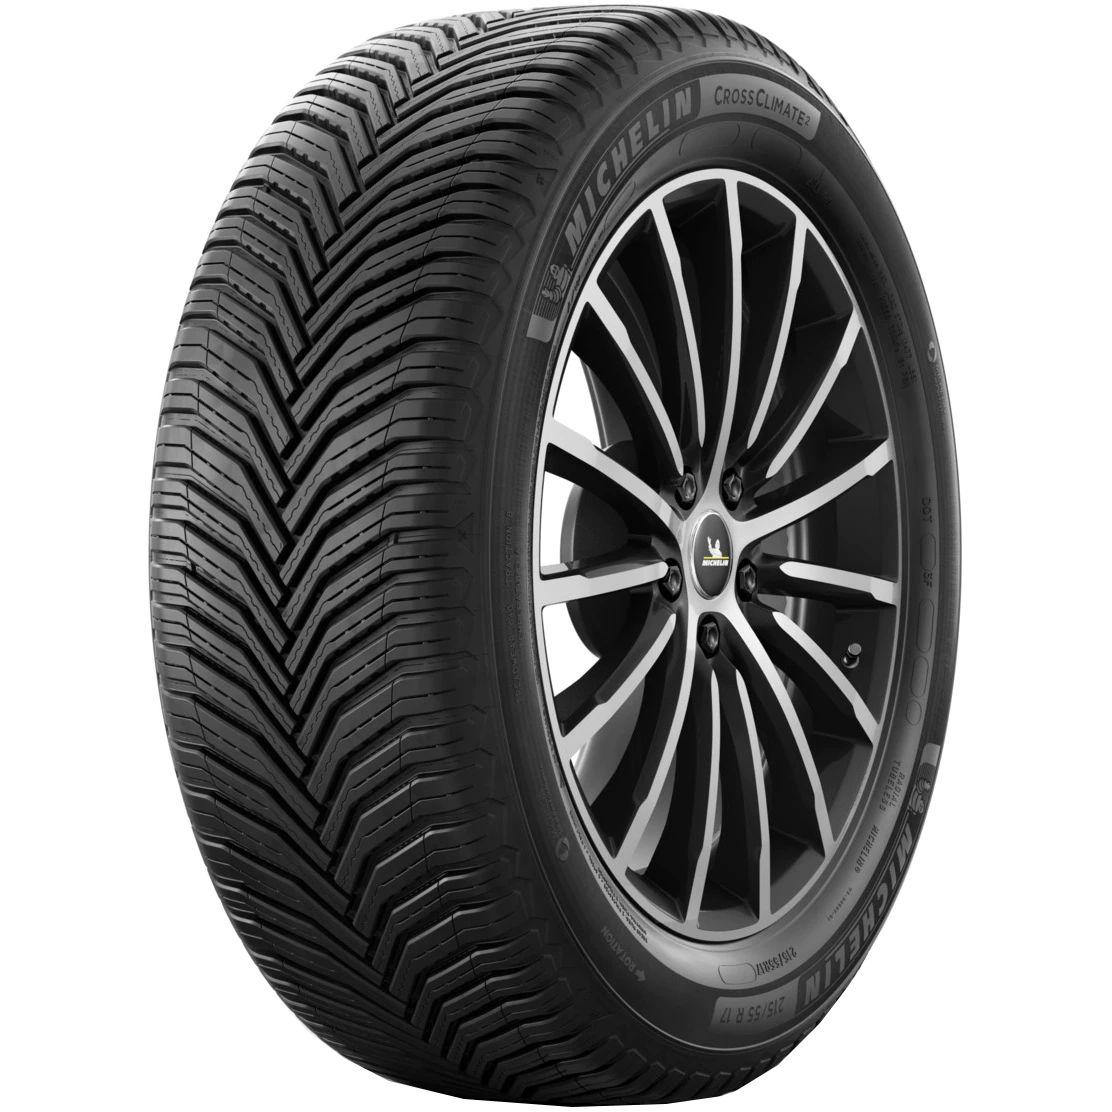 Anvelope all seasons MICHELIN CrossClimate2 Suv XL M+S 225/65 R17 106V